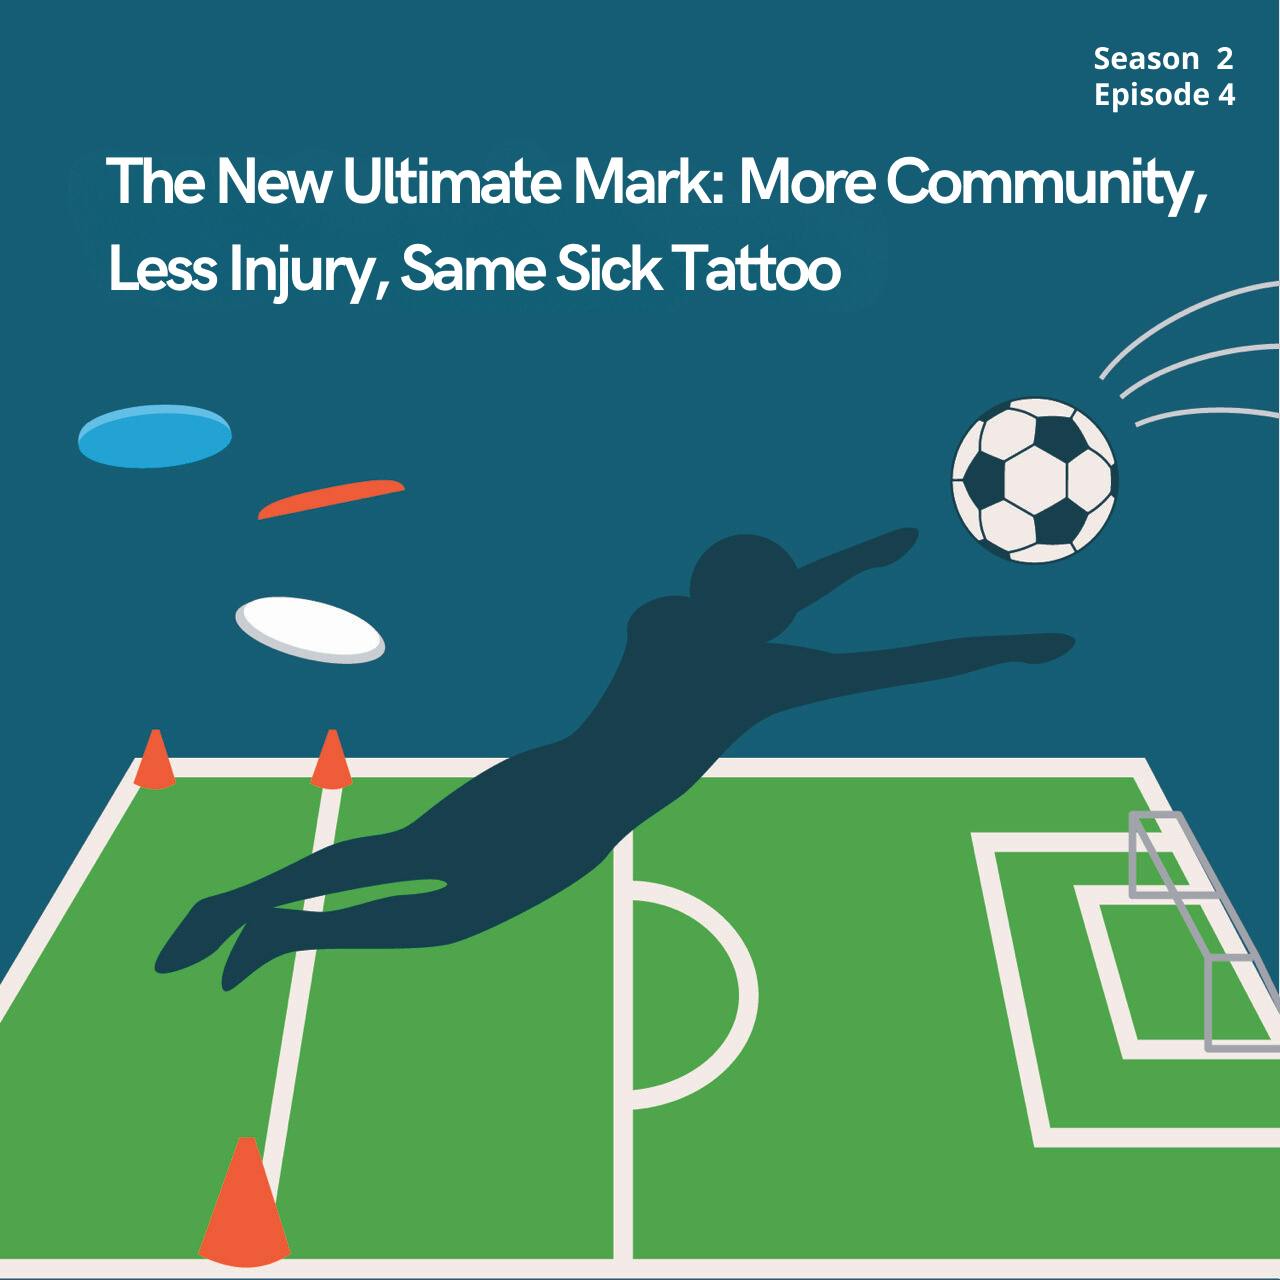 The New Ultimate Mark: More Community, Less Injury, Same Sick Tattoo